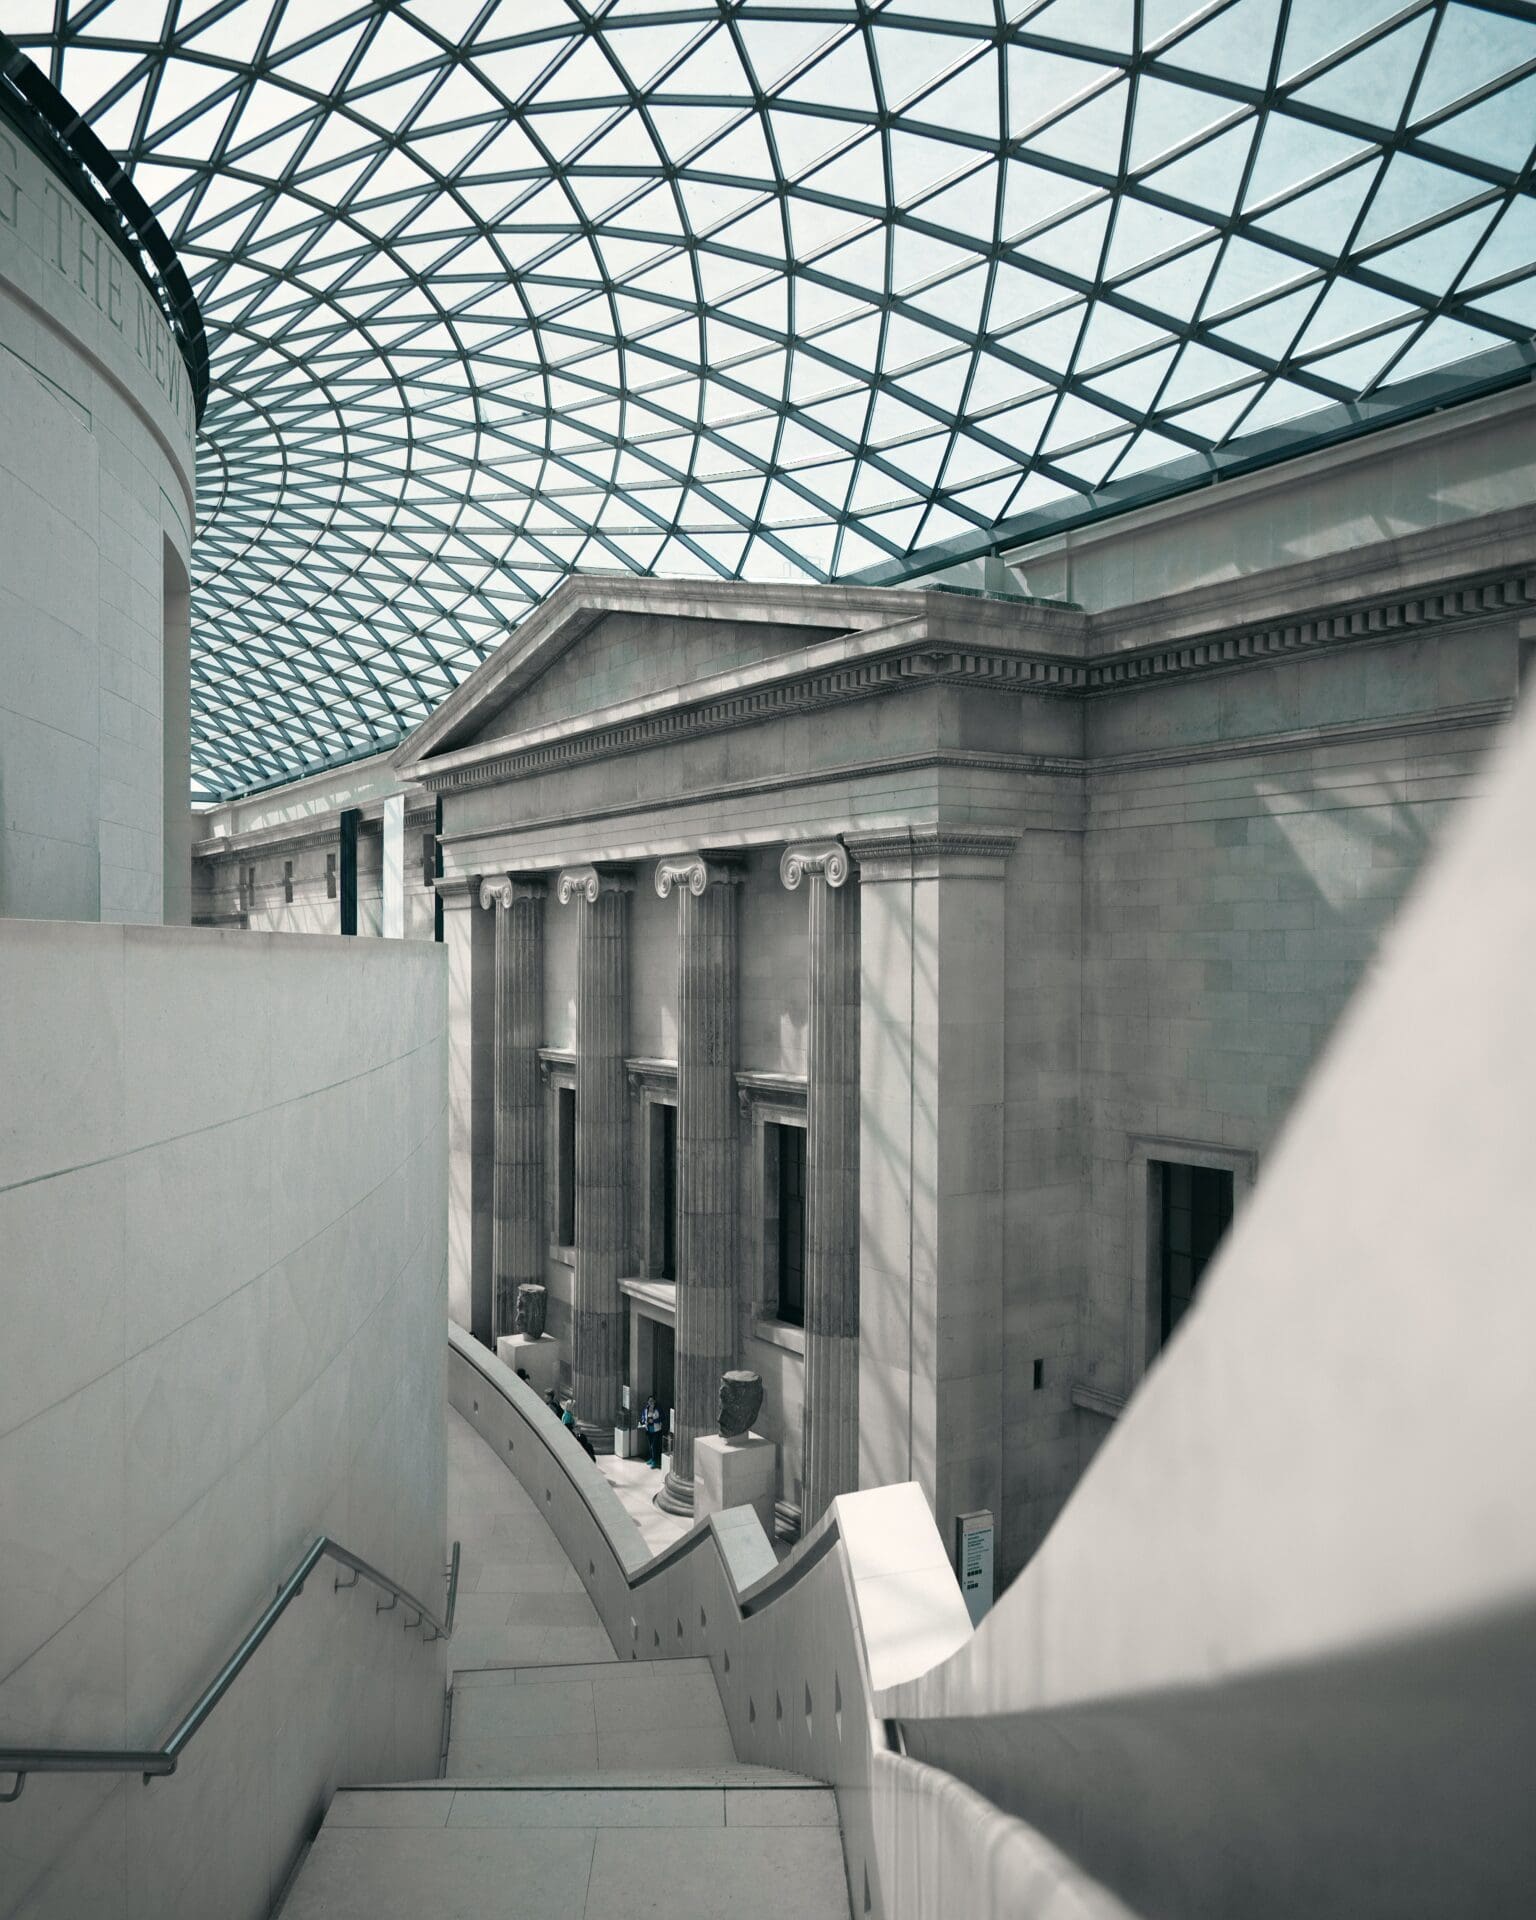 Best museums and galleries in London | Inside the domed courtyard at the centre of the British Museum